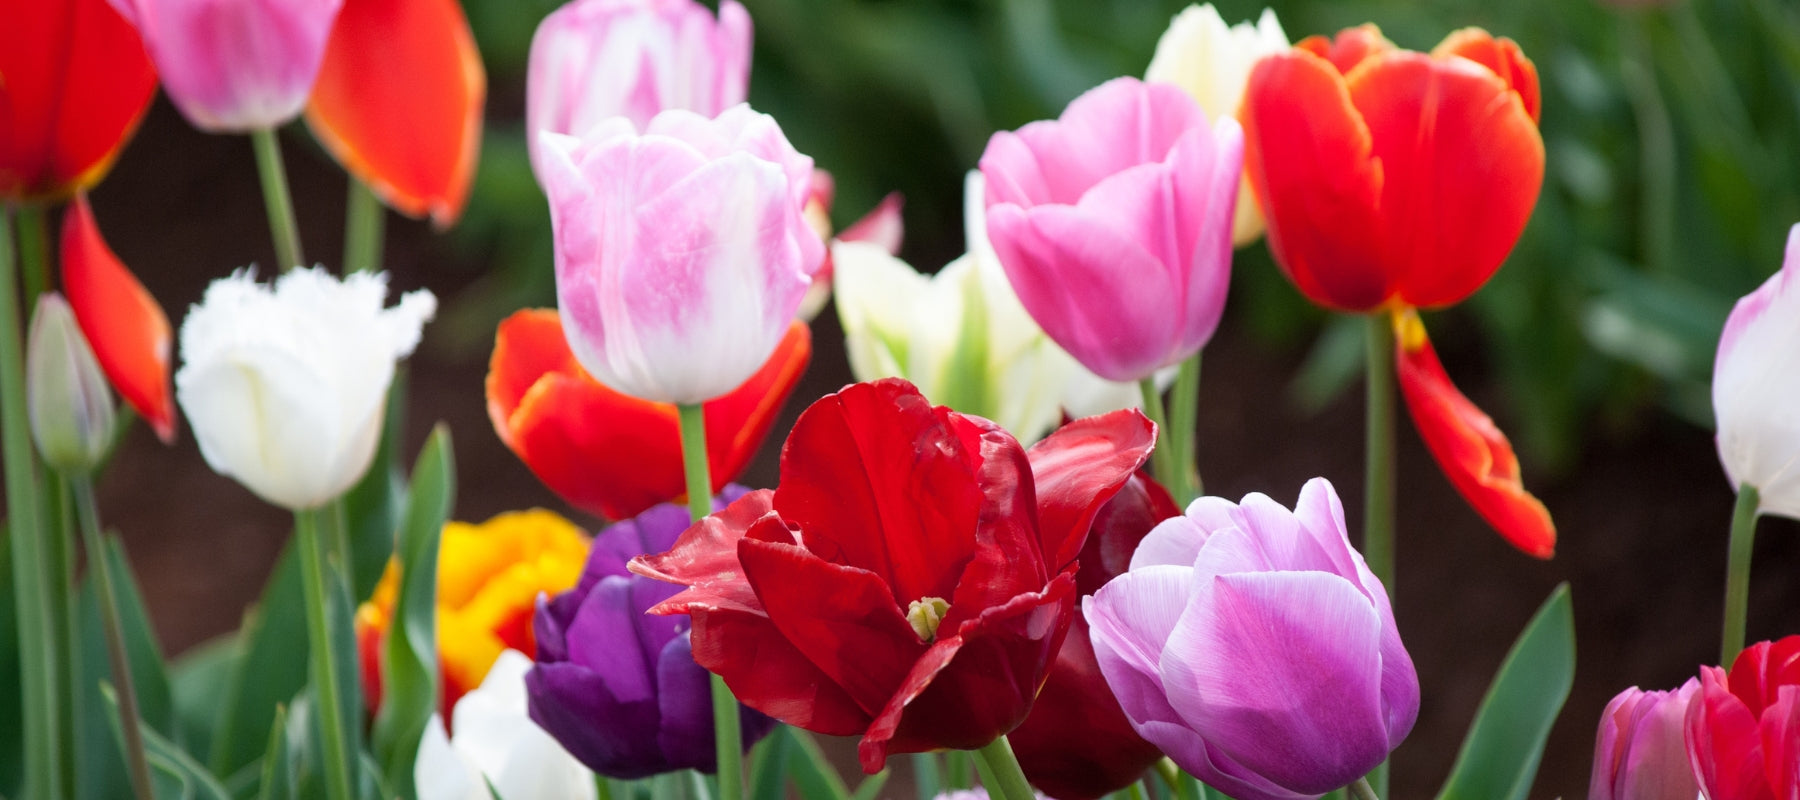 7 Tips for planting tulips